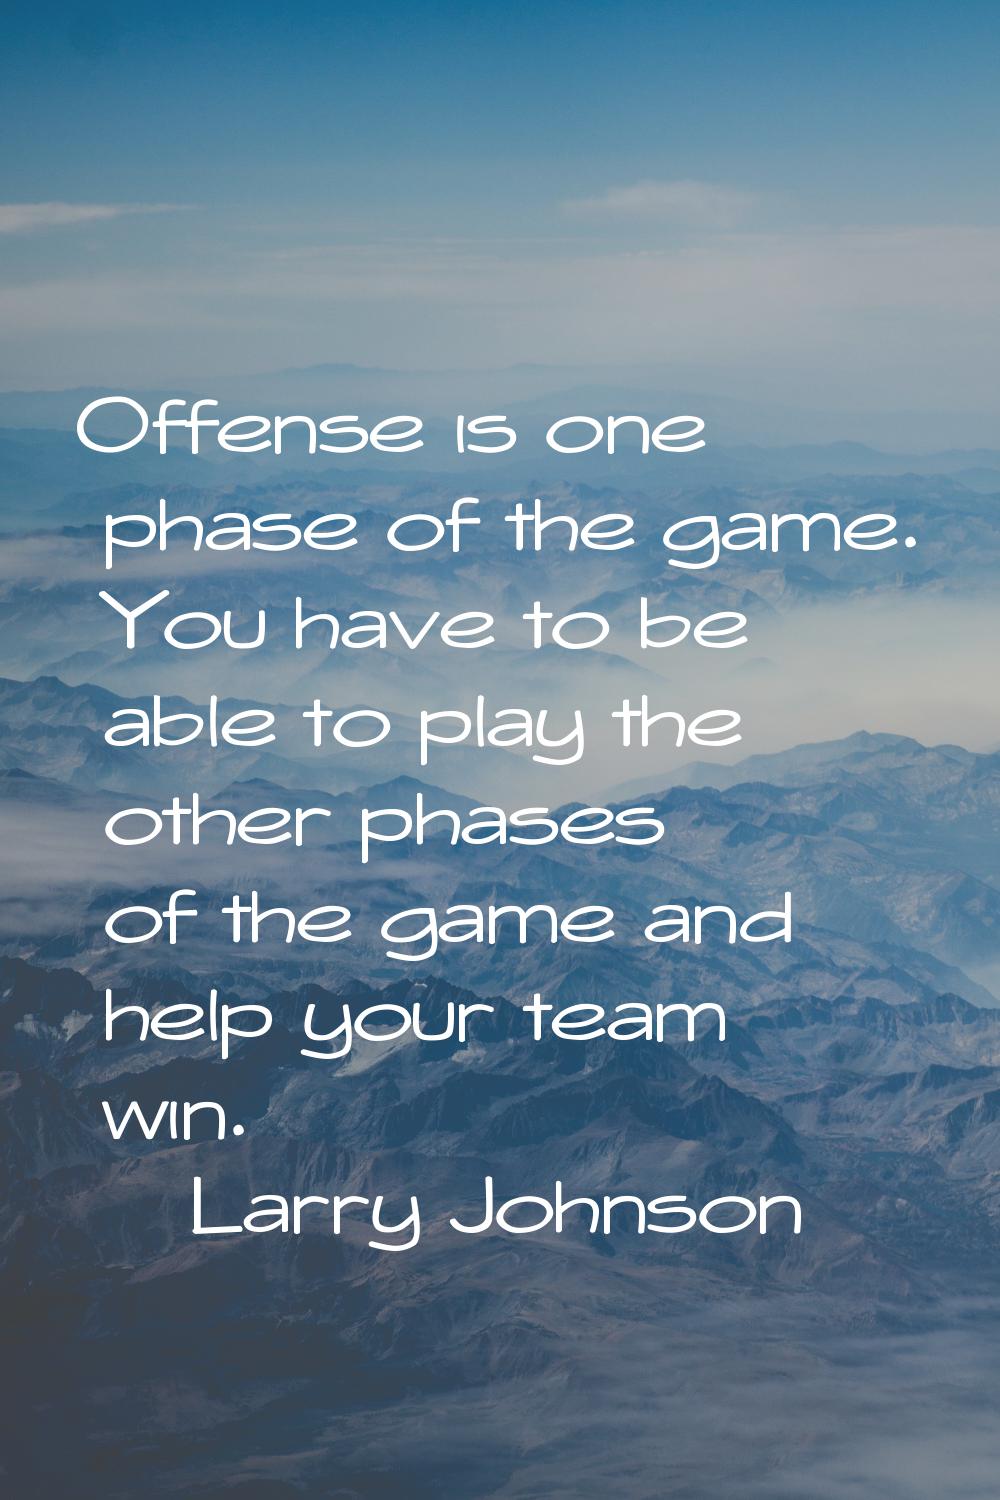 Offense is one phase of the game. You have to be able to play the other phases of the game and help